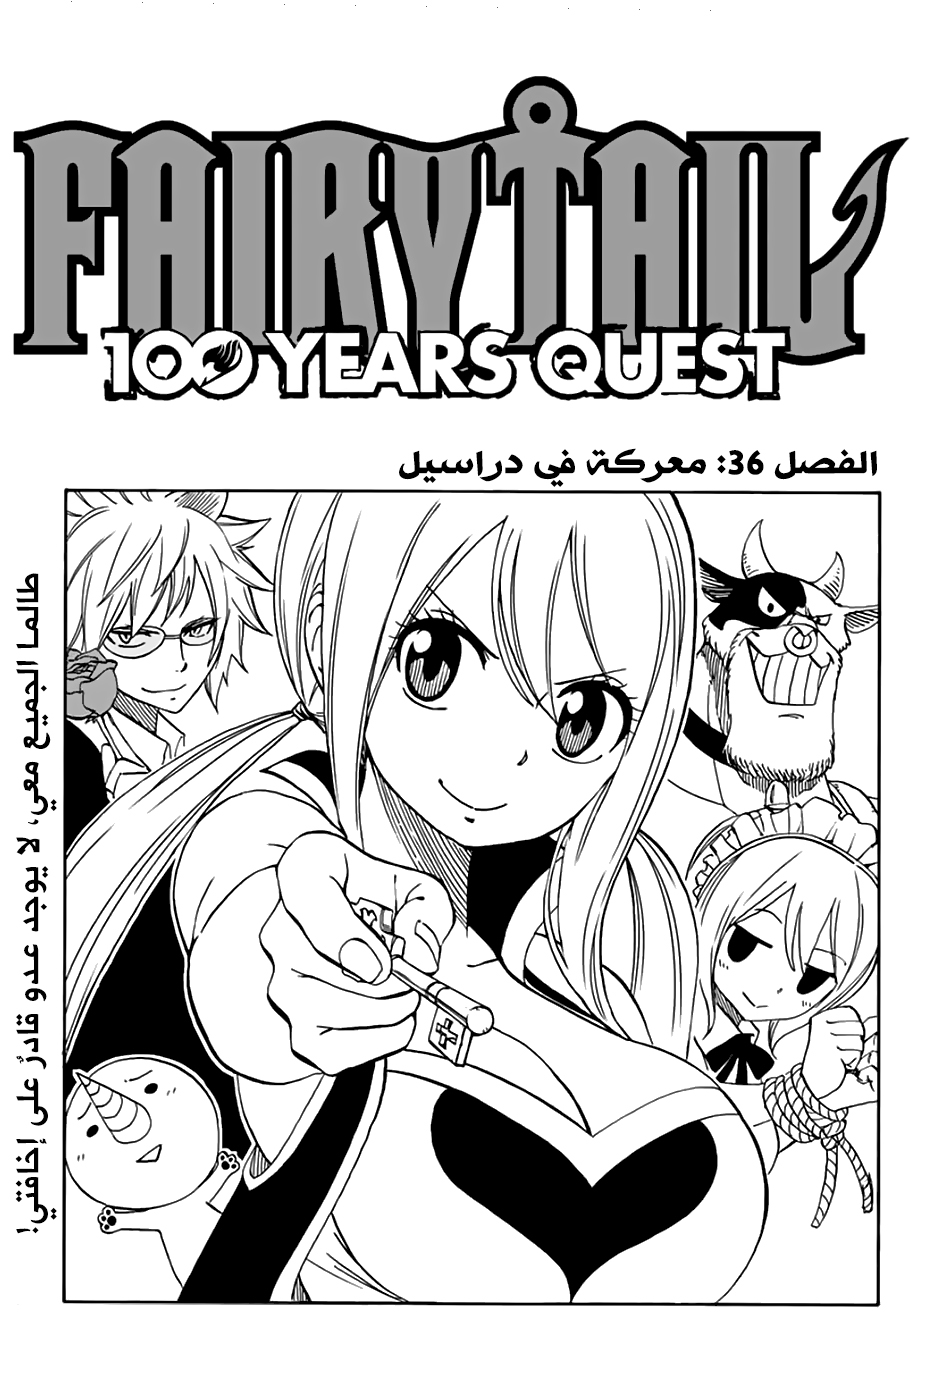 Fairy Tail 100 Years Quest: Chapter 36 - Page 1